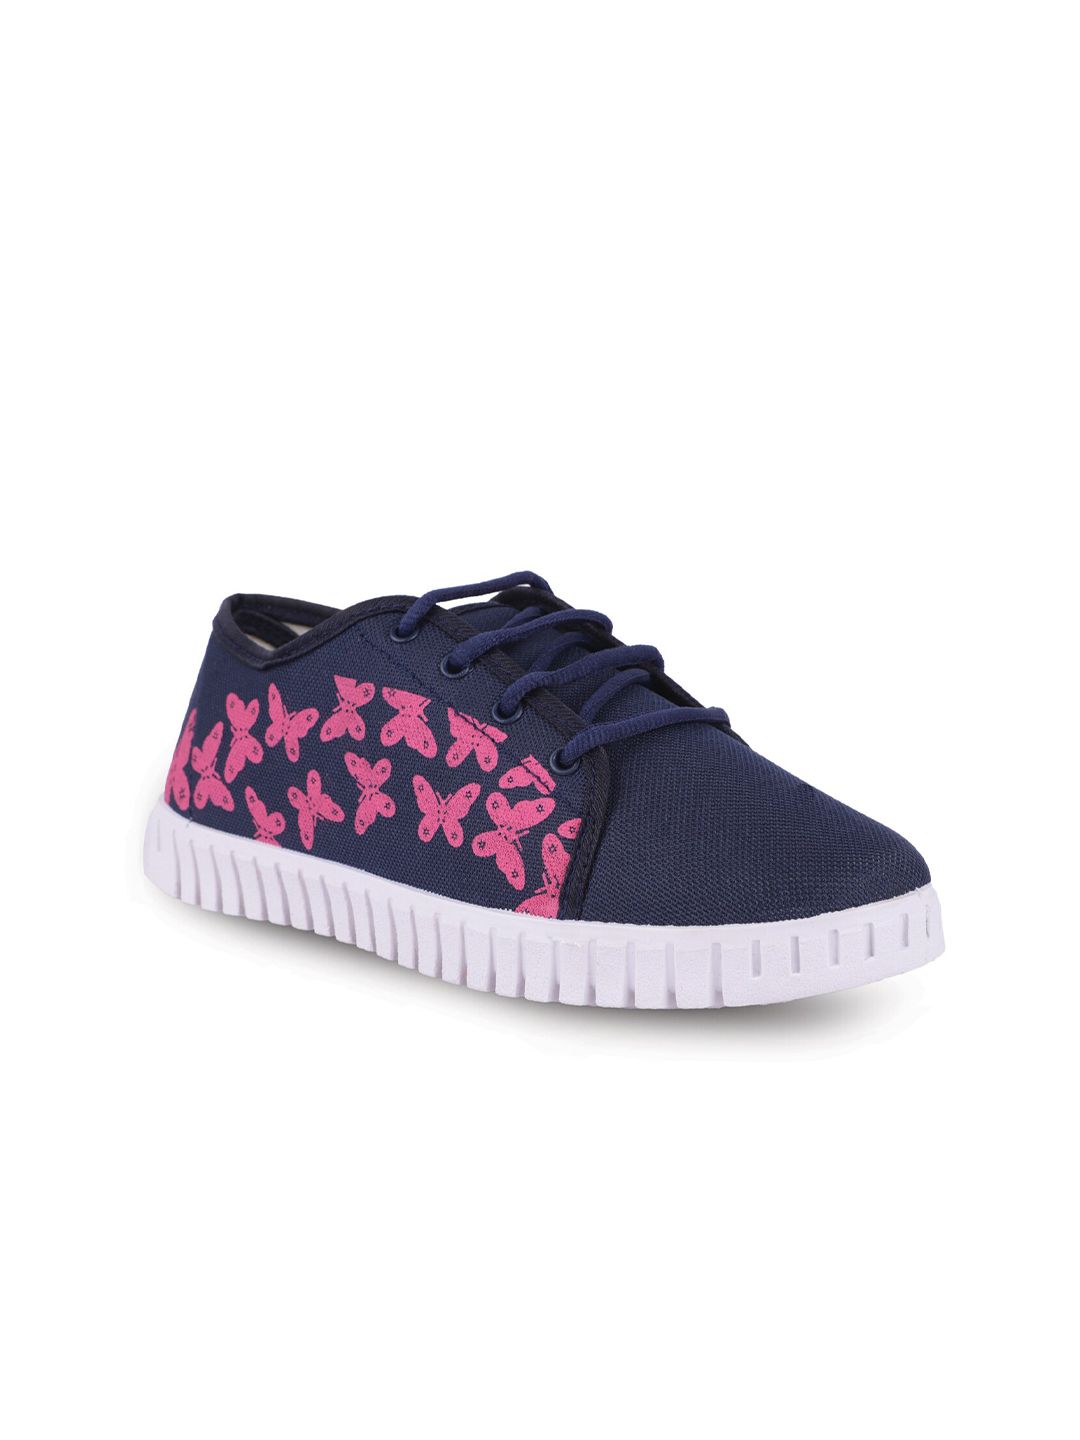 FABBMATE Women Navy Blue Walking Non-Marking Shoes Price in India